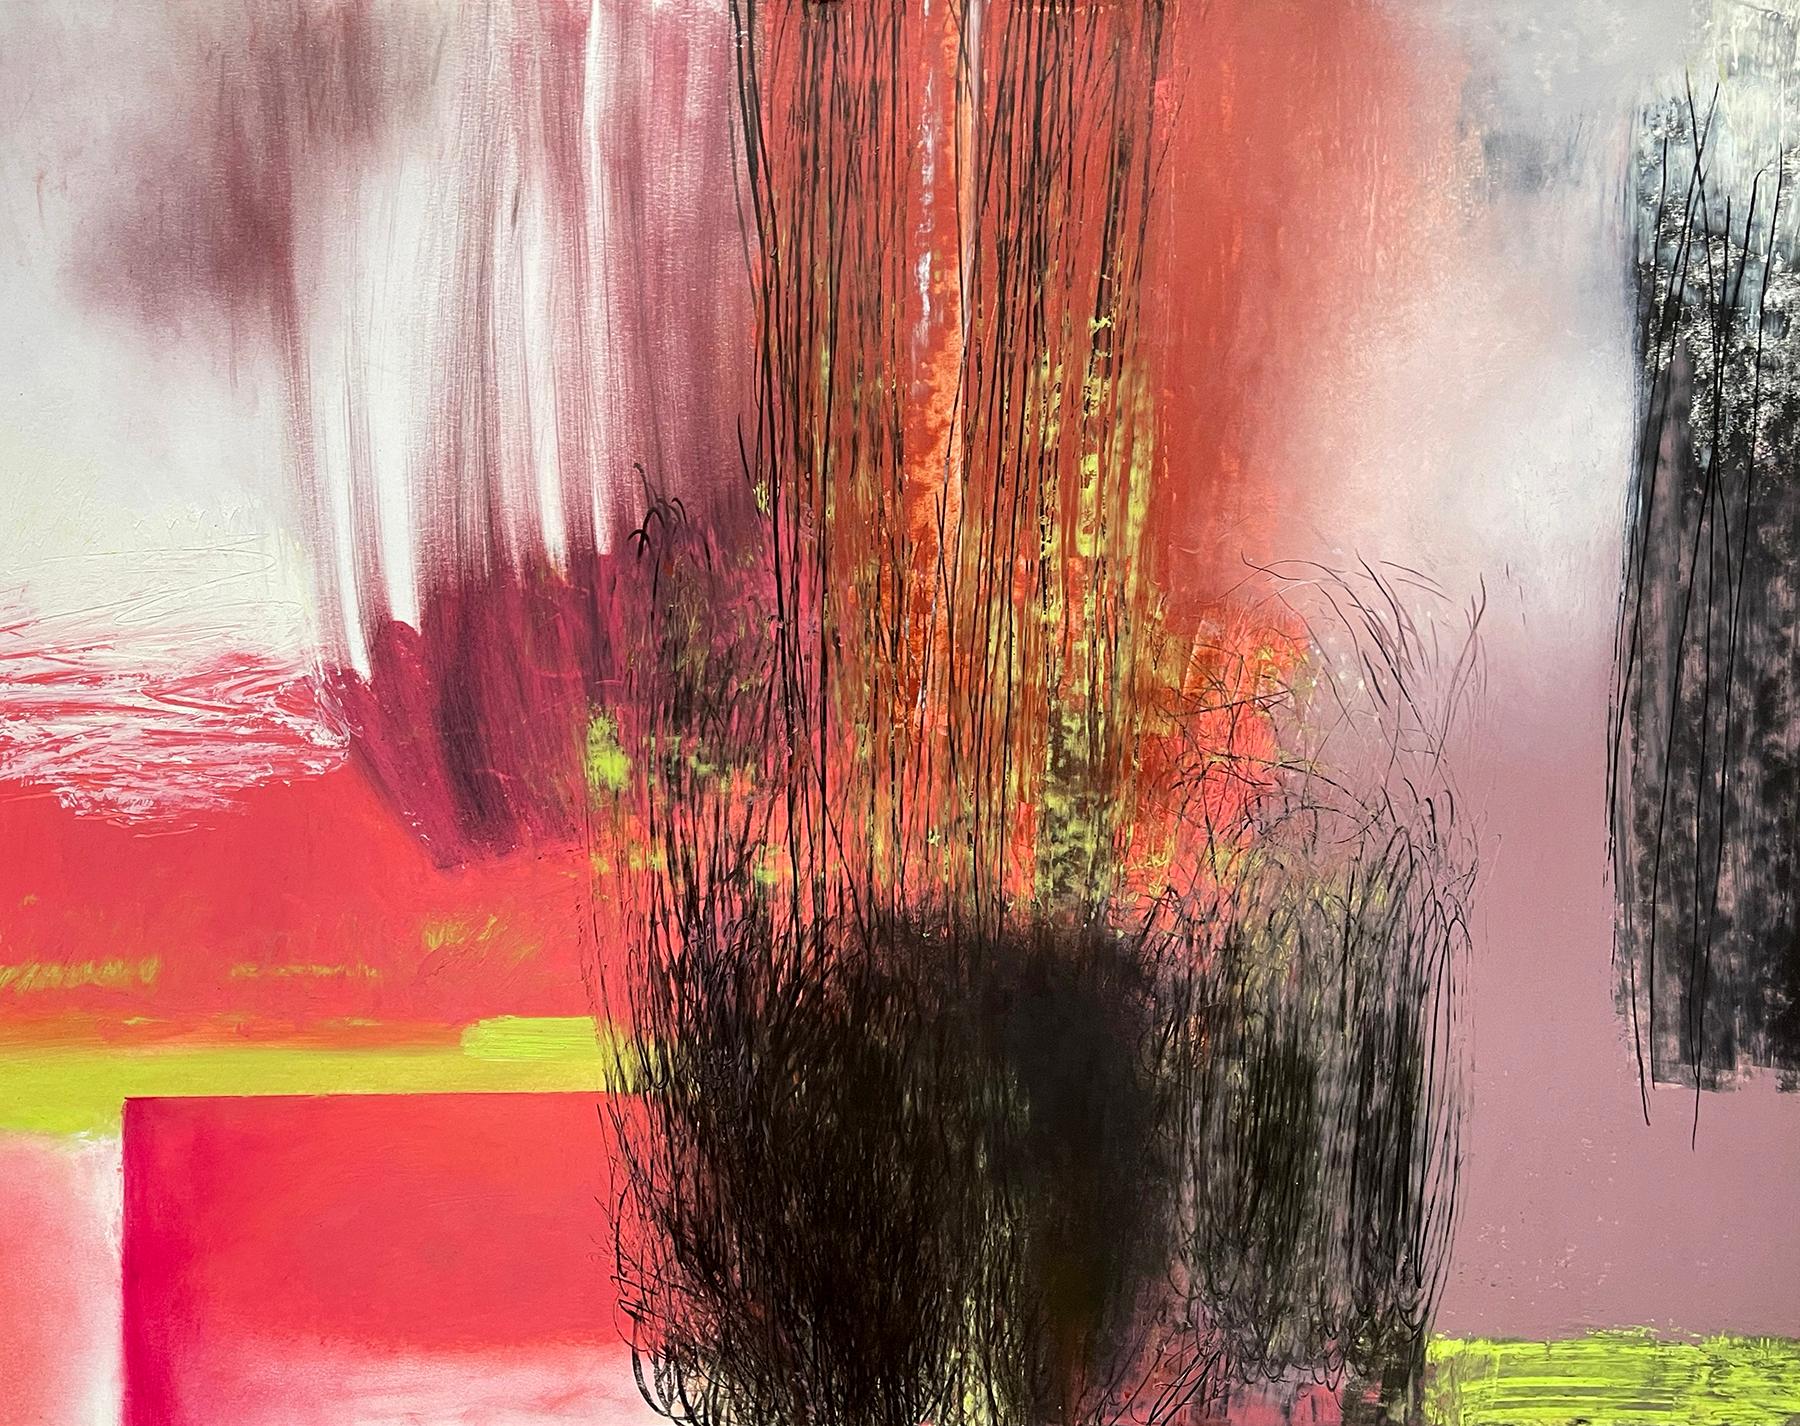 Kirsten Hawthorne received her MFA from the School of the Art Institute of Chicago, and she lives and works in New York City. Hawthorne is a master oil pastellist creating works on paper that perfectly locate a balance; first between abstraction and